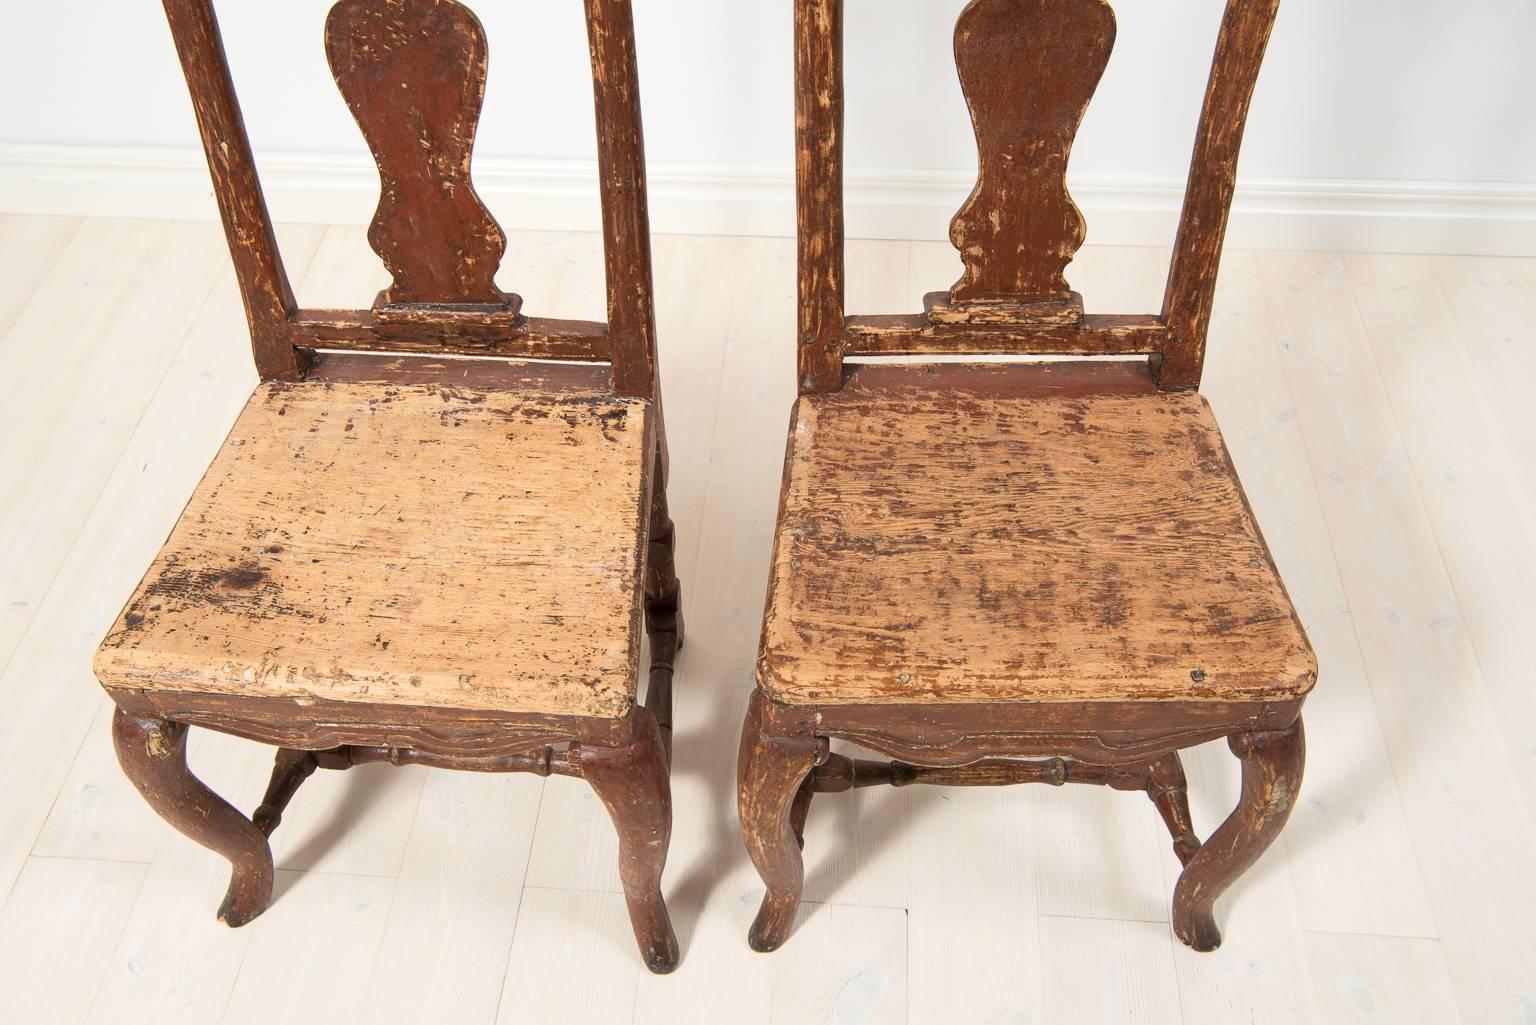 Pair of 18th Century Antique Swedish Baroque Dining Room Chairs Pine Tall Backs In Good Condition For Sale In Kramfors, SE